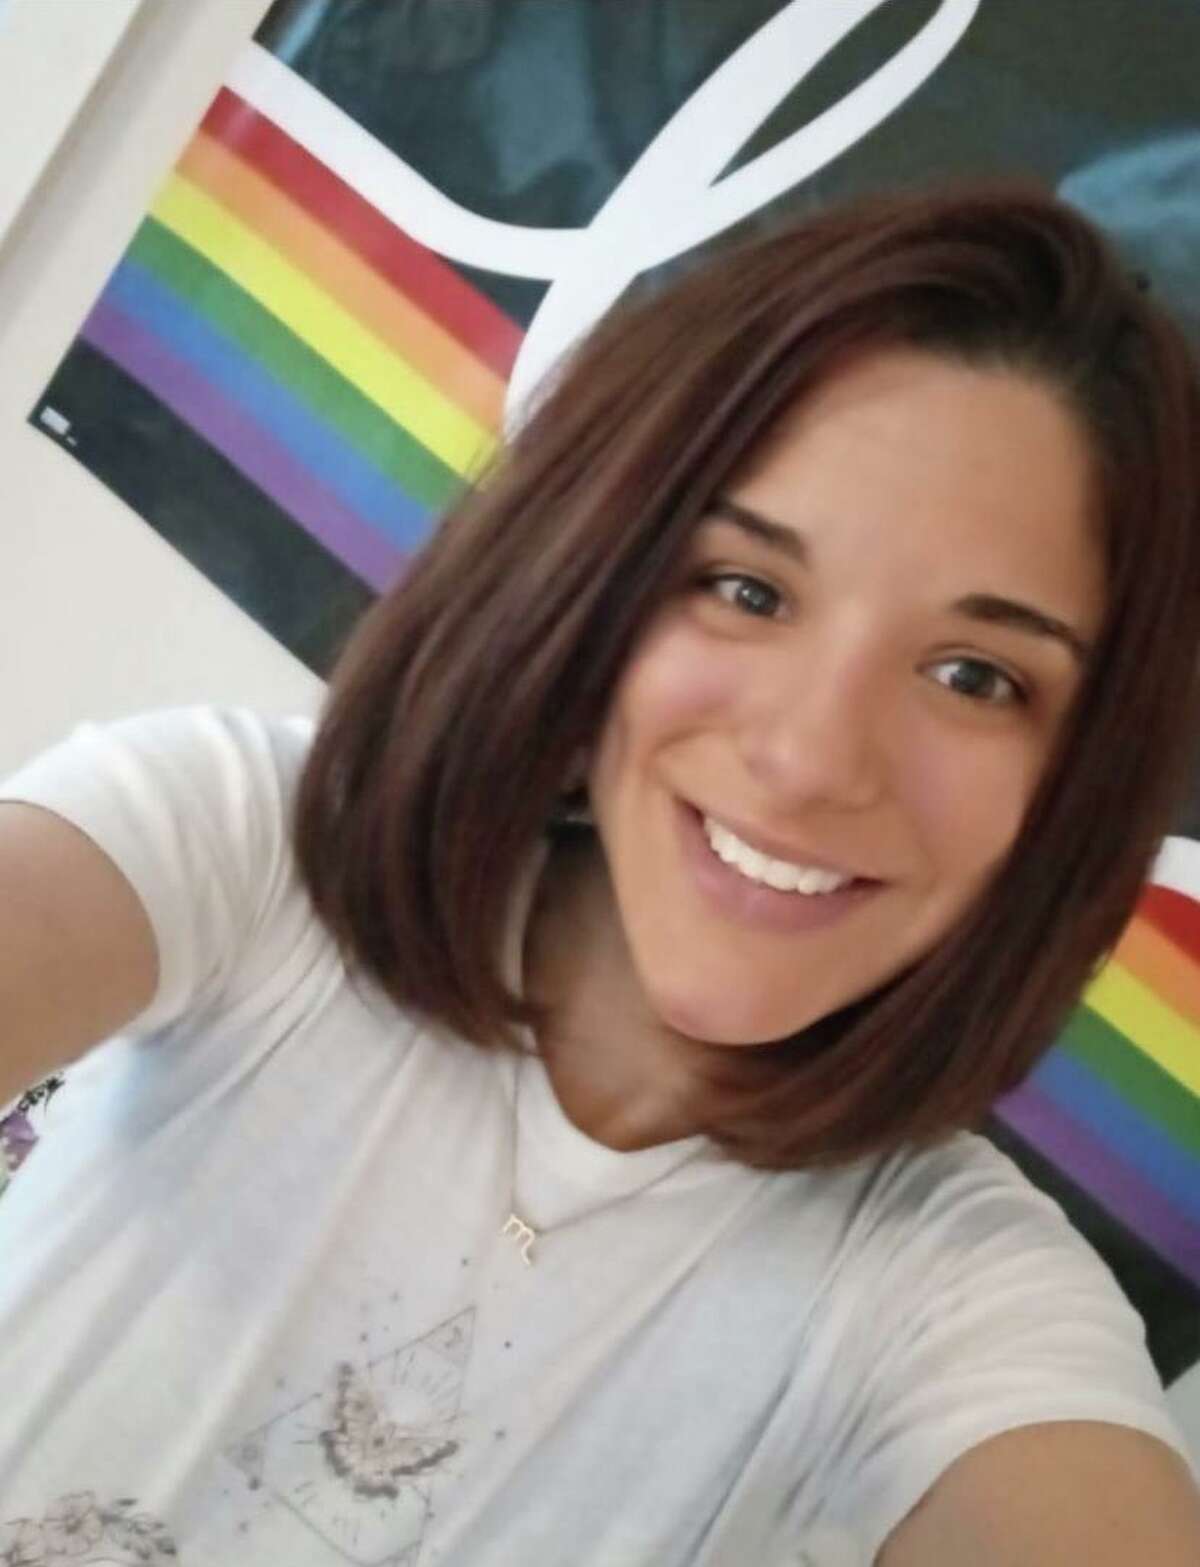 Norwalk Police are searching for Ashley Dombroski,33, after she was reported missing since approximately 11:30 p.m. on Thursday night. Her last known wherabouts was at a residence on Elmcrest Terrace. If you have any information regarding her possible whereabouts, please contact 203-854-3113.